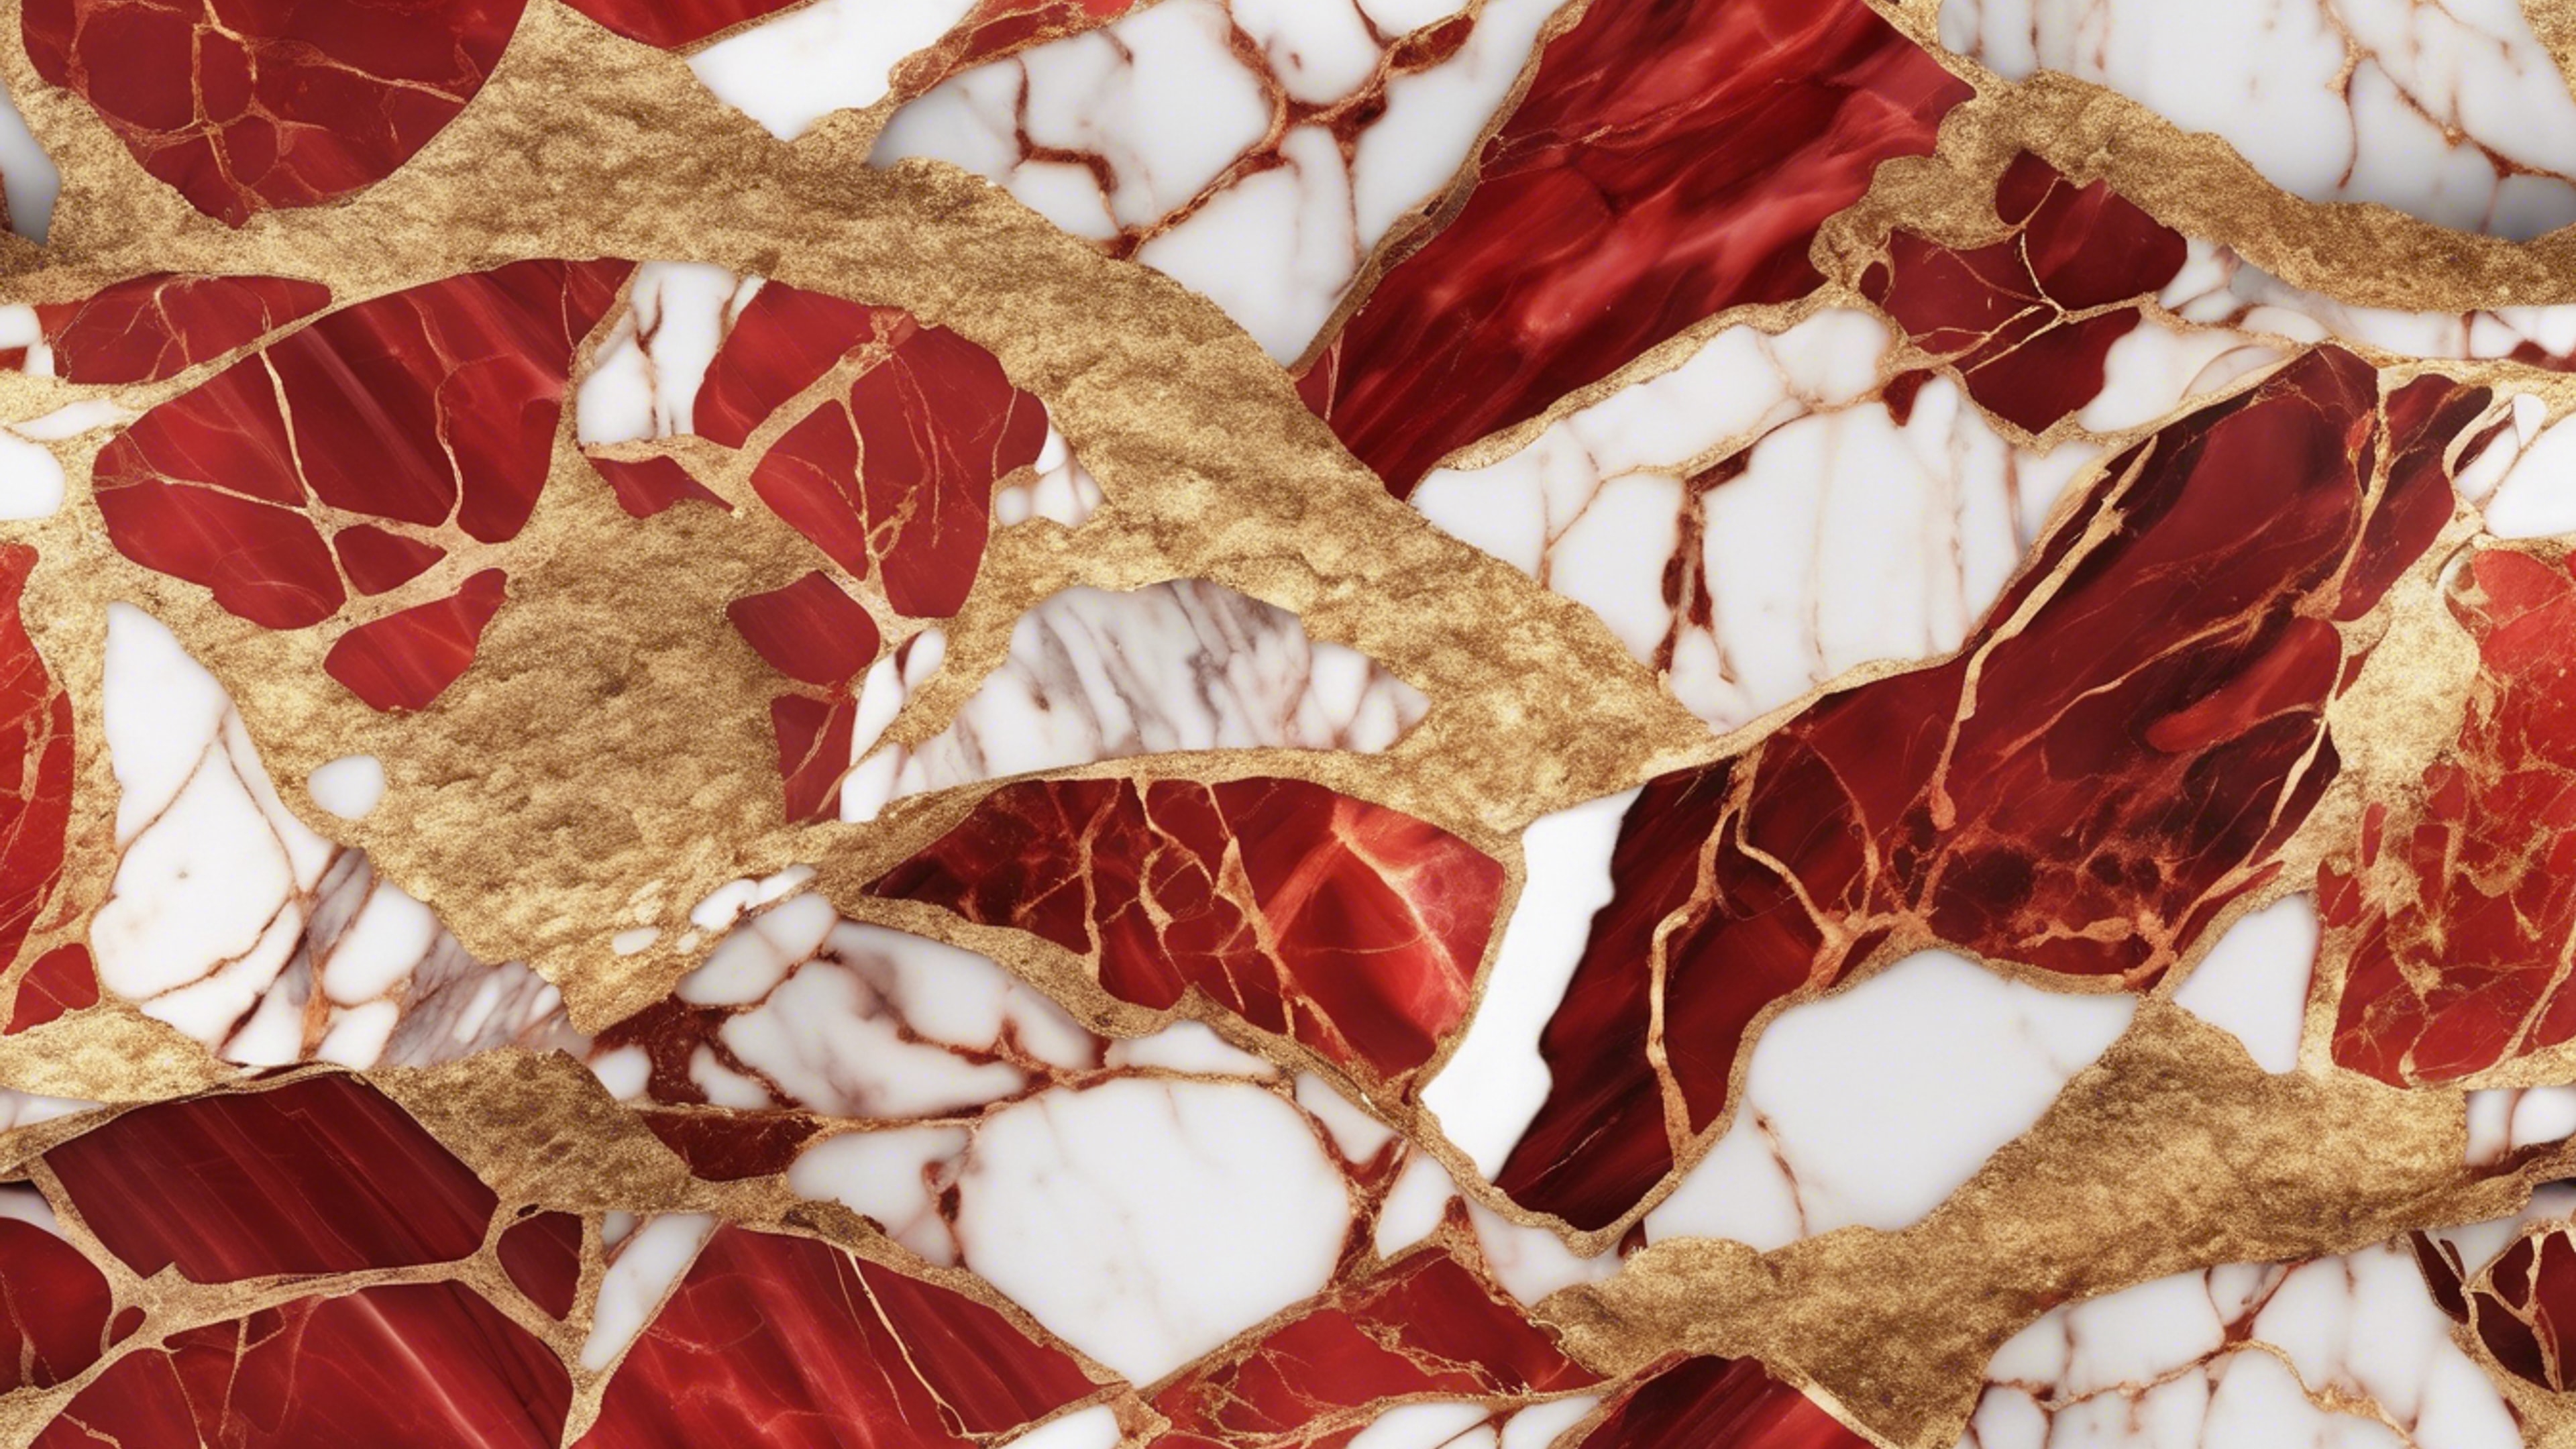 Seamless pattern of red and gold marble set that reflects an elegant aesthetic.壁紙[f027cacdf9b04c65aa51]